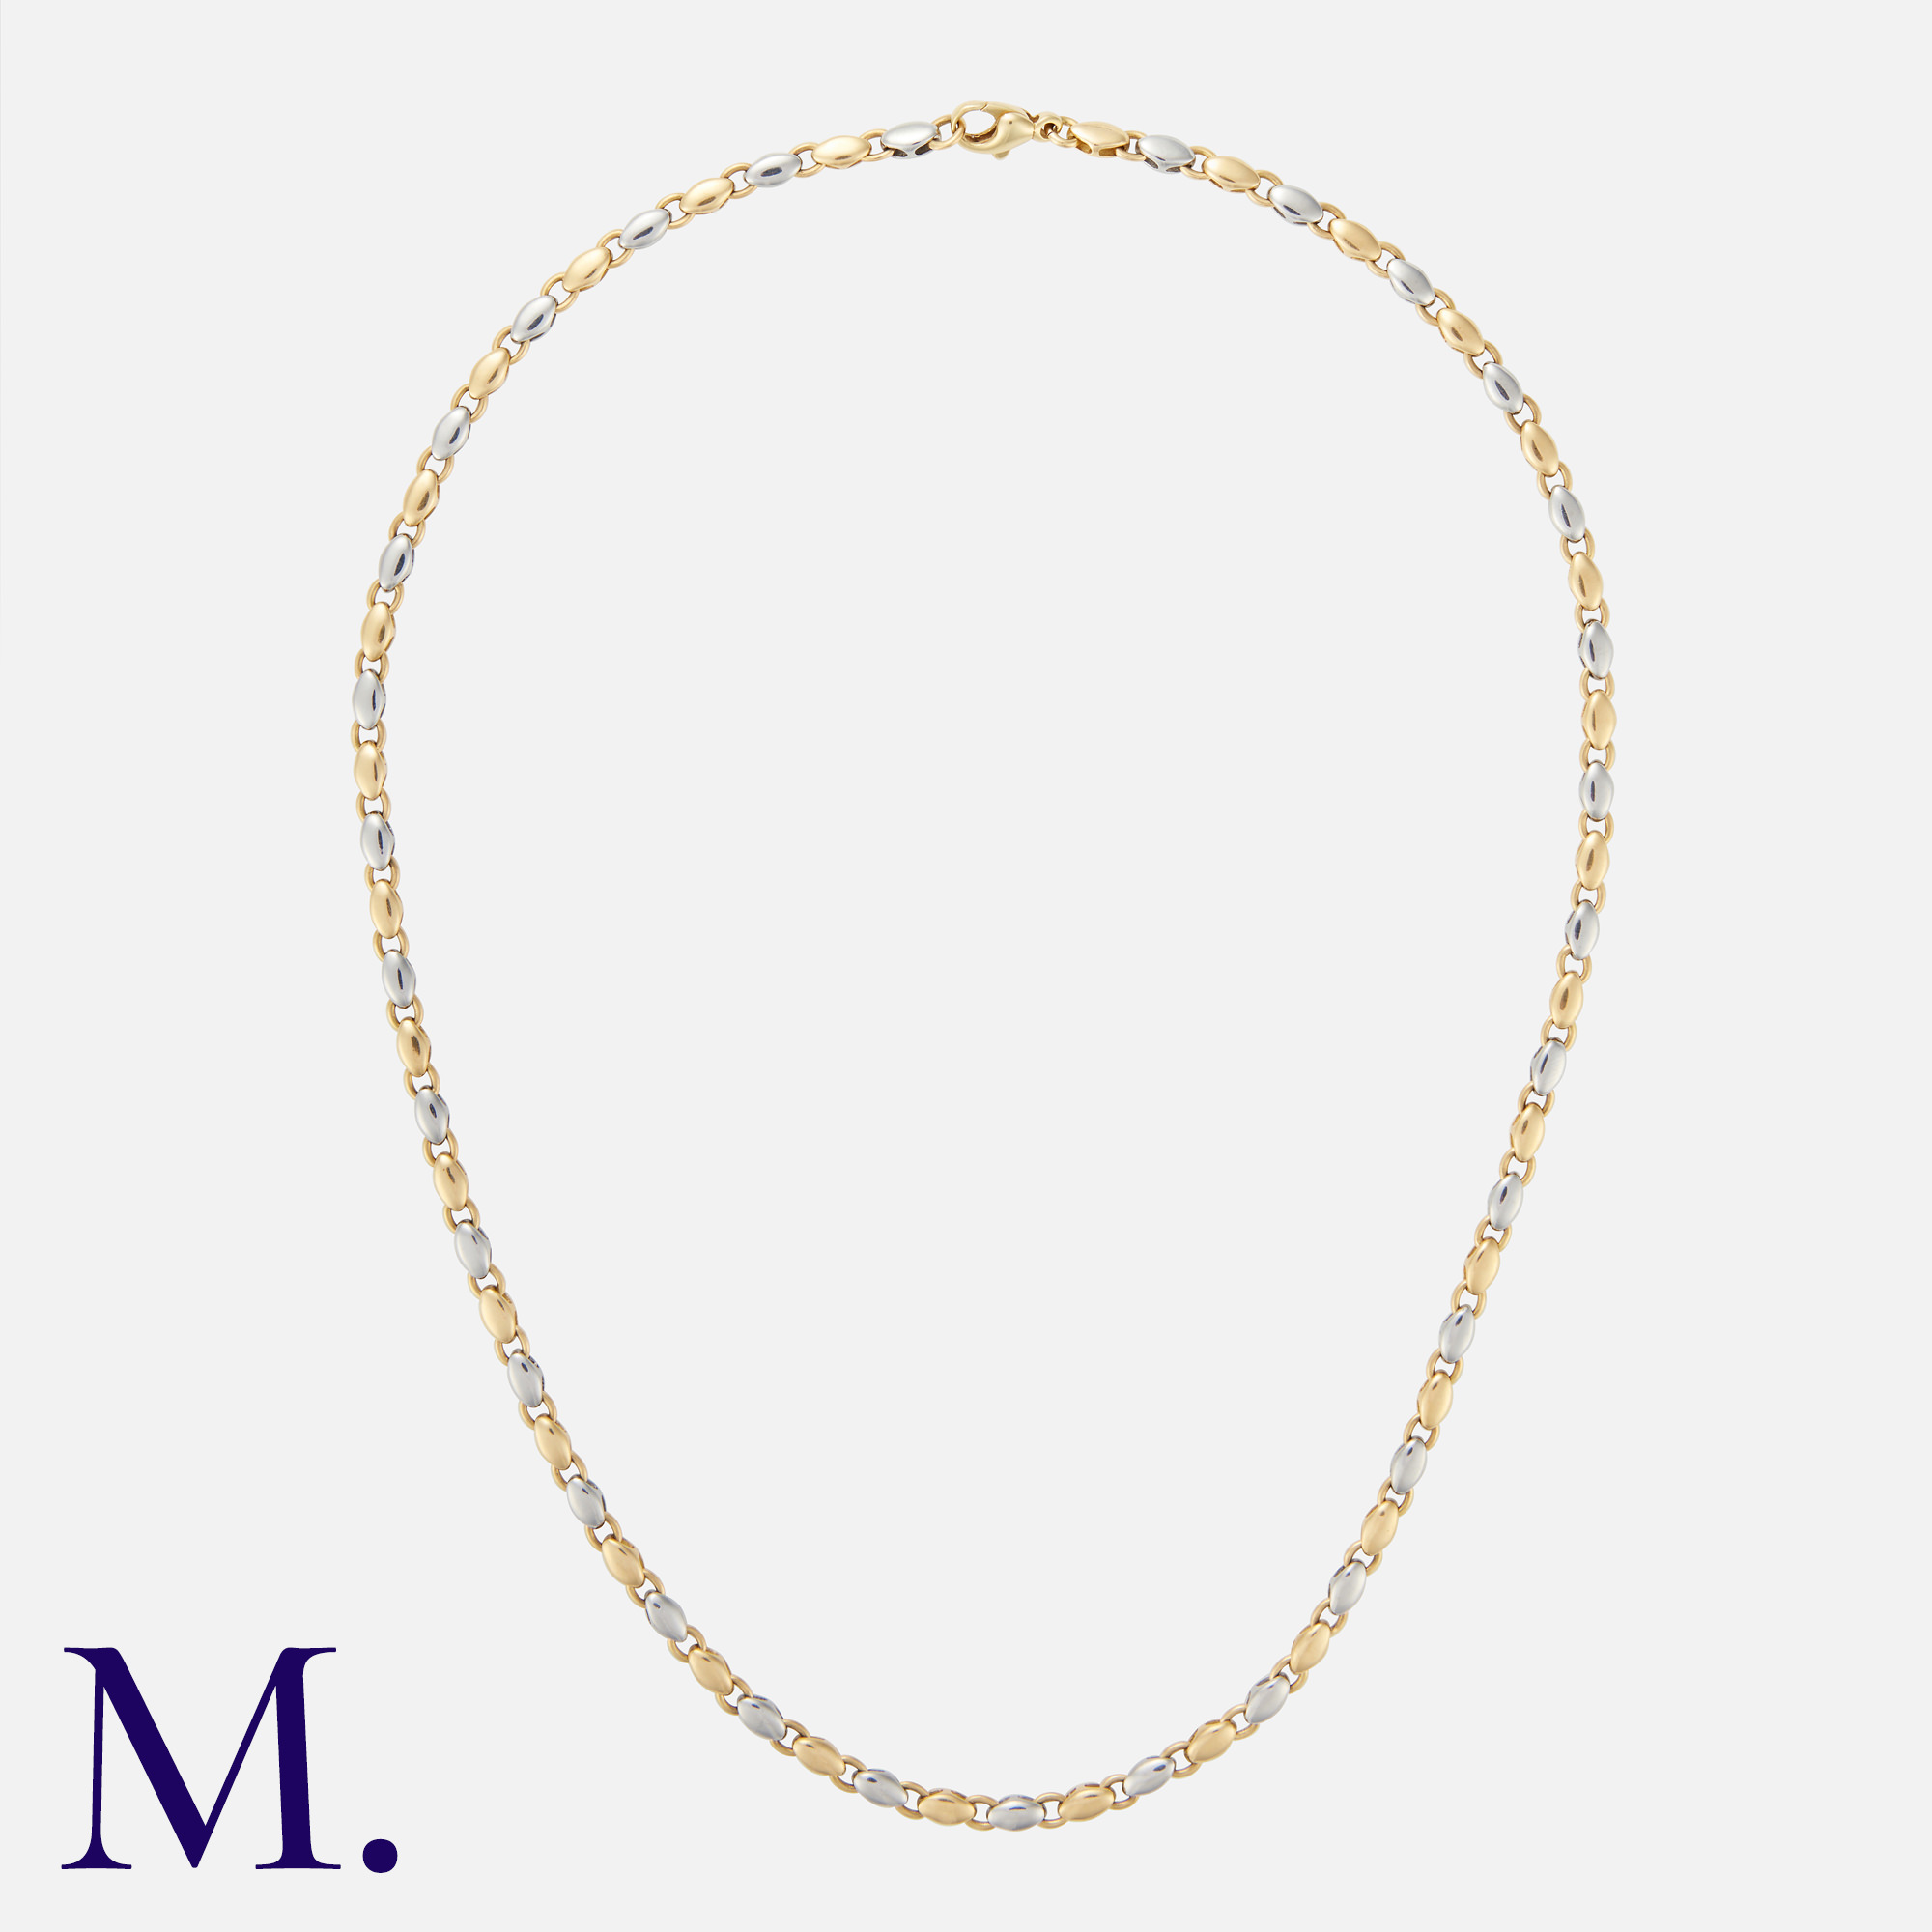 BULGARI. A Gold and Steel Chain in 18K yellow gold and steel, with interlocking oval links. Size: